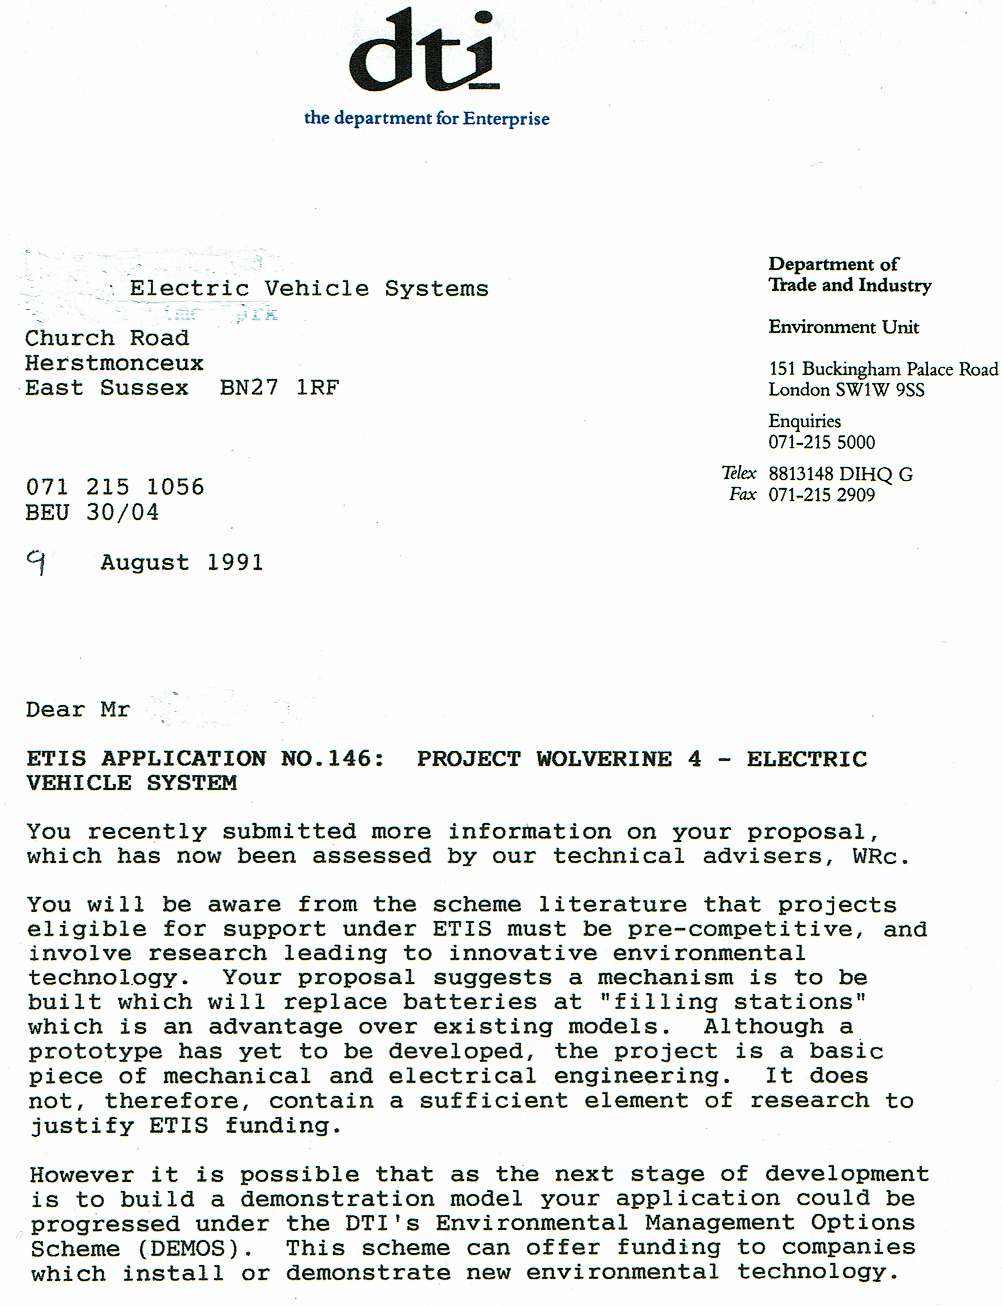 Letter from DTi to EV battery service station developers 9 August 1991